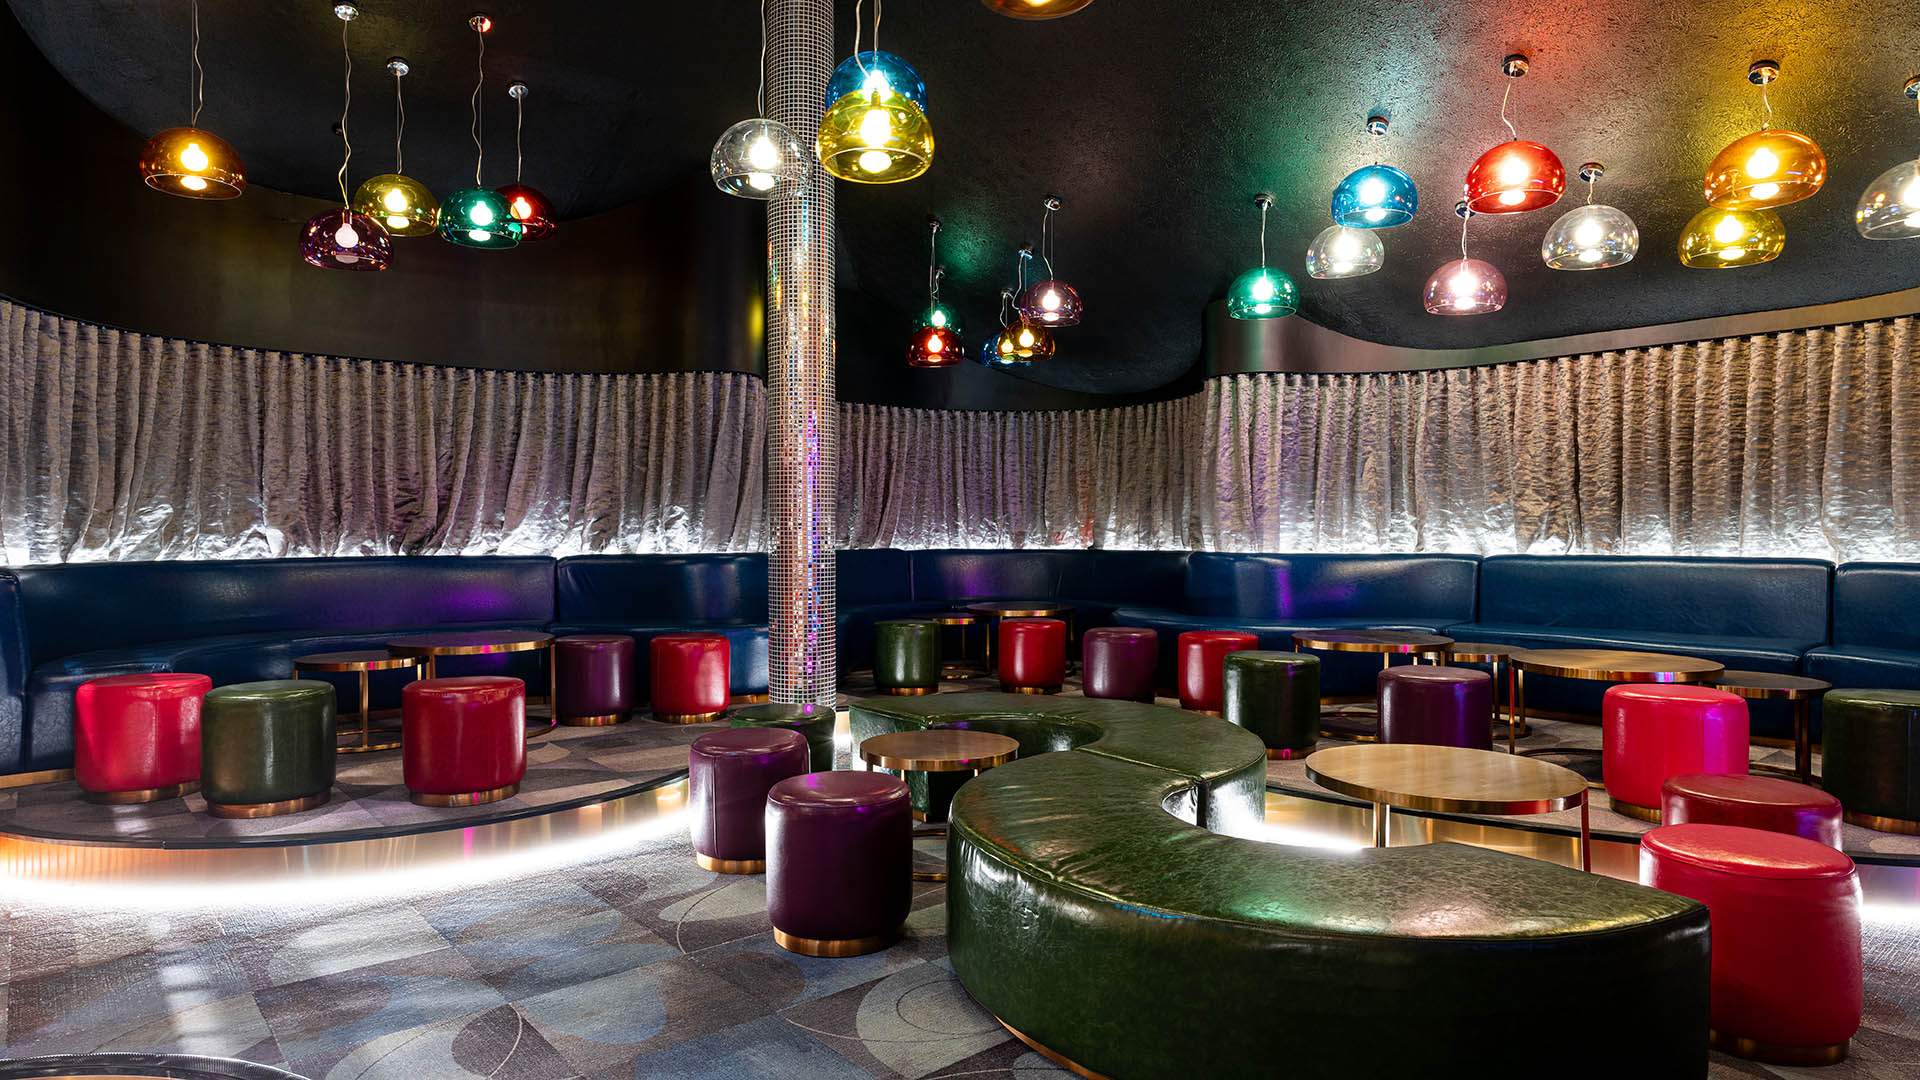 Retro Nightclub Superfly Disco Has Brought Its Light-Up Dance Floor to Alhambra Lounge's Old Digs